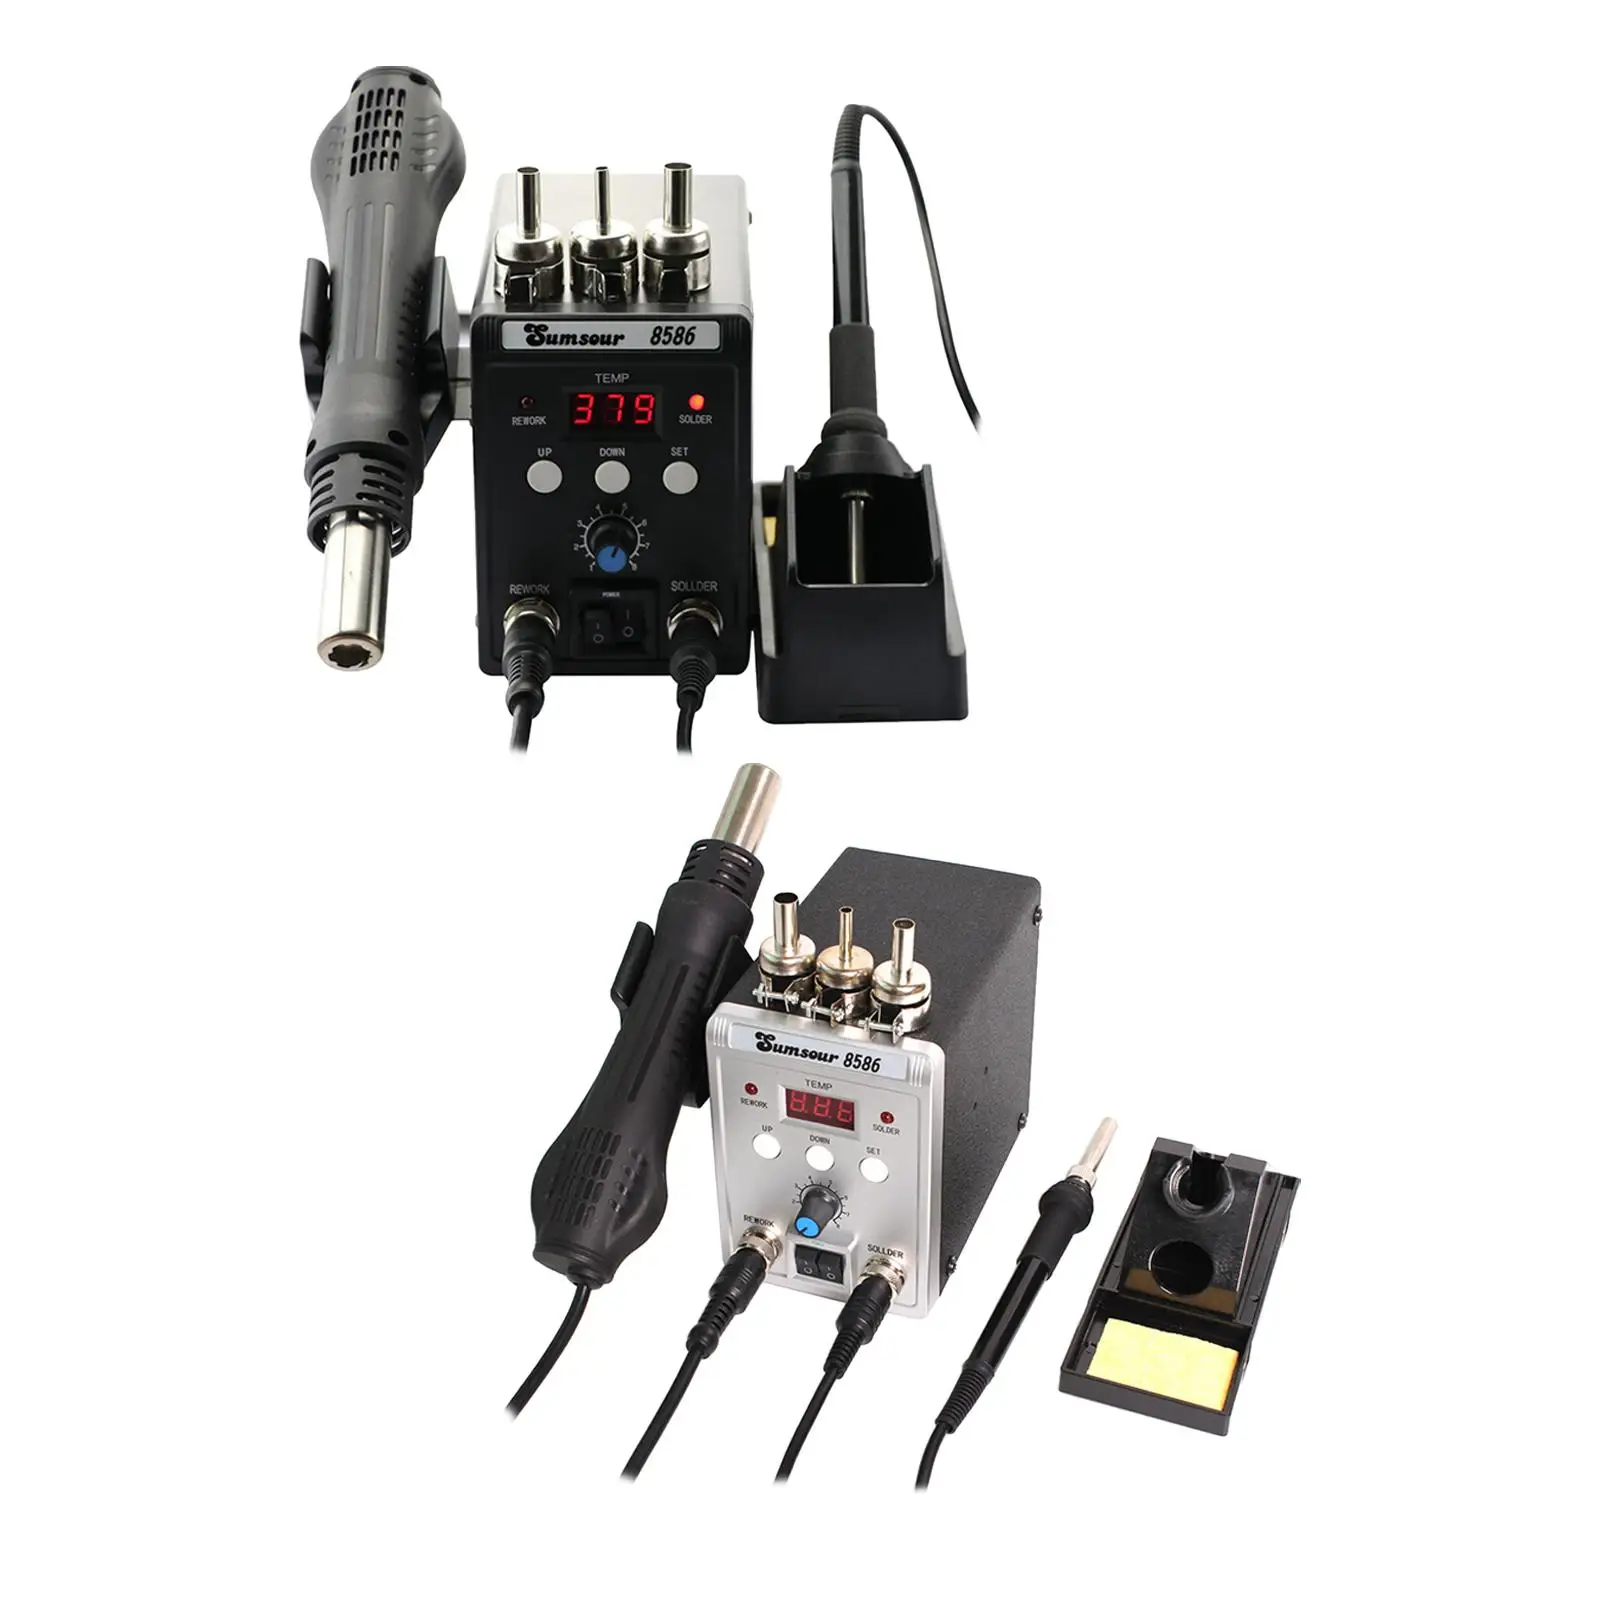 Electric Welding Tool Professional Durable Hot Air Rework 60W Soldering Iron Station for Home Appliance Maintenance Phone Laptop